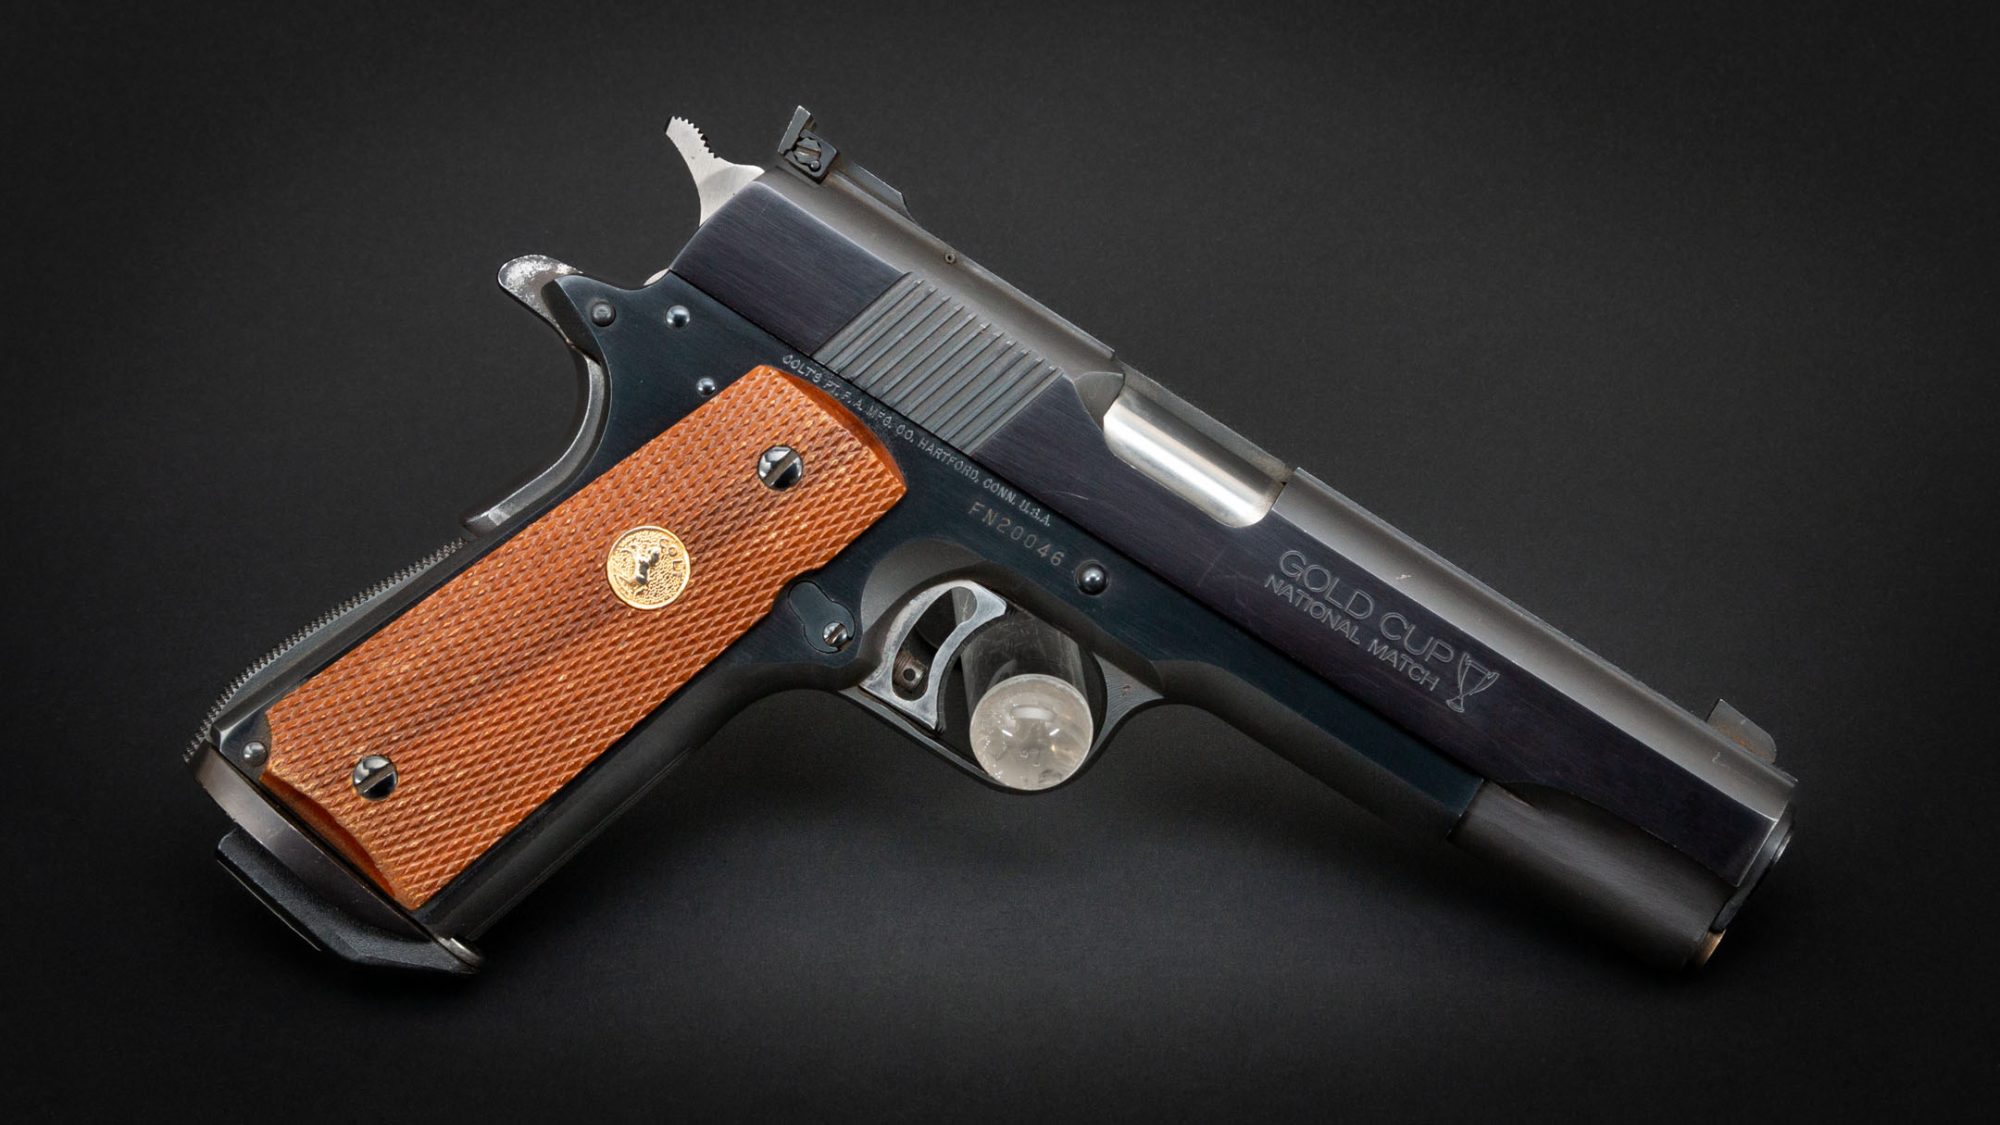 Colt M1911 Series 80 Mark IV Gold Cup National Match in .45 ACP, for sale by Turnbull Restoration Co. of Bloomfield, NY